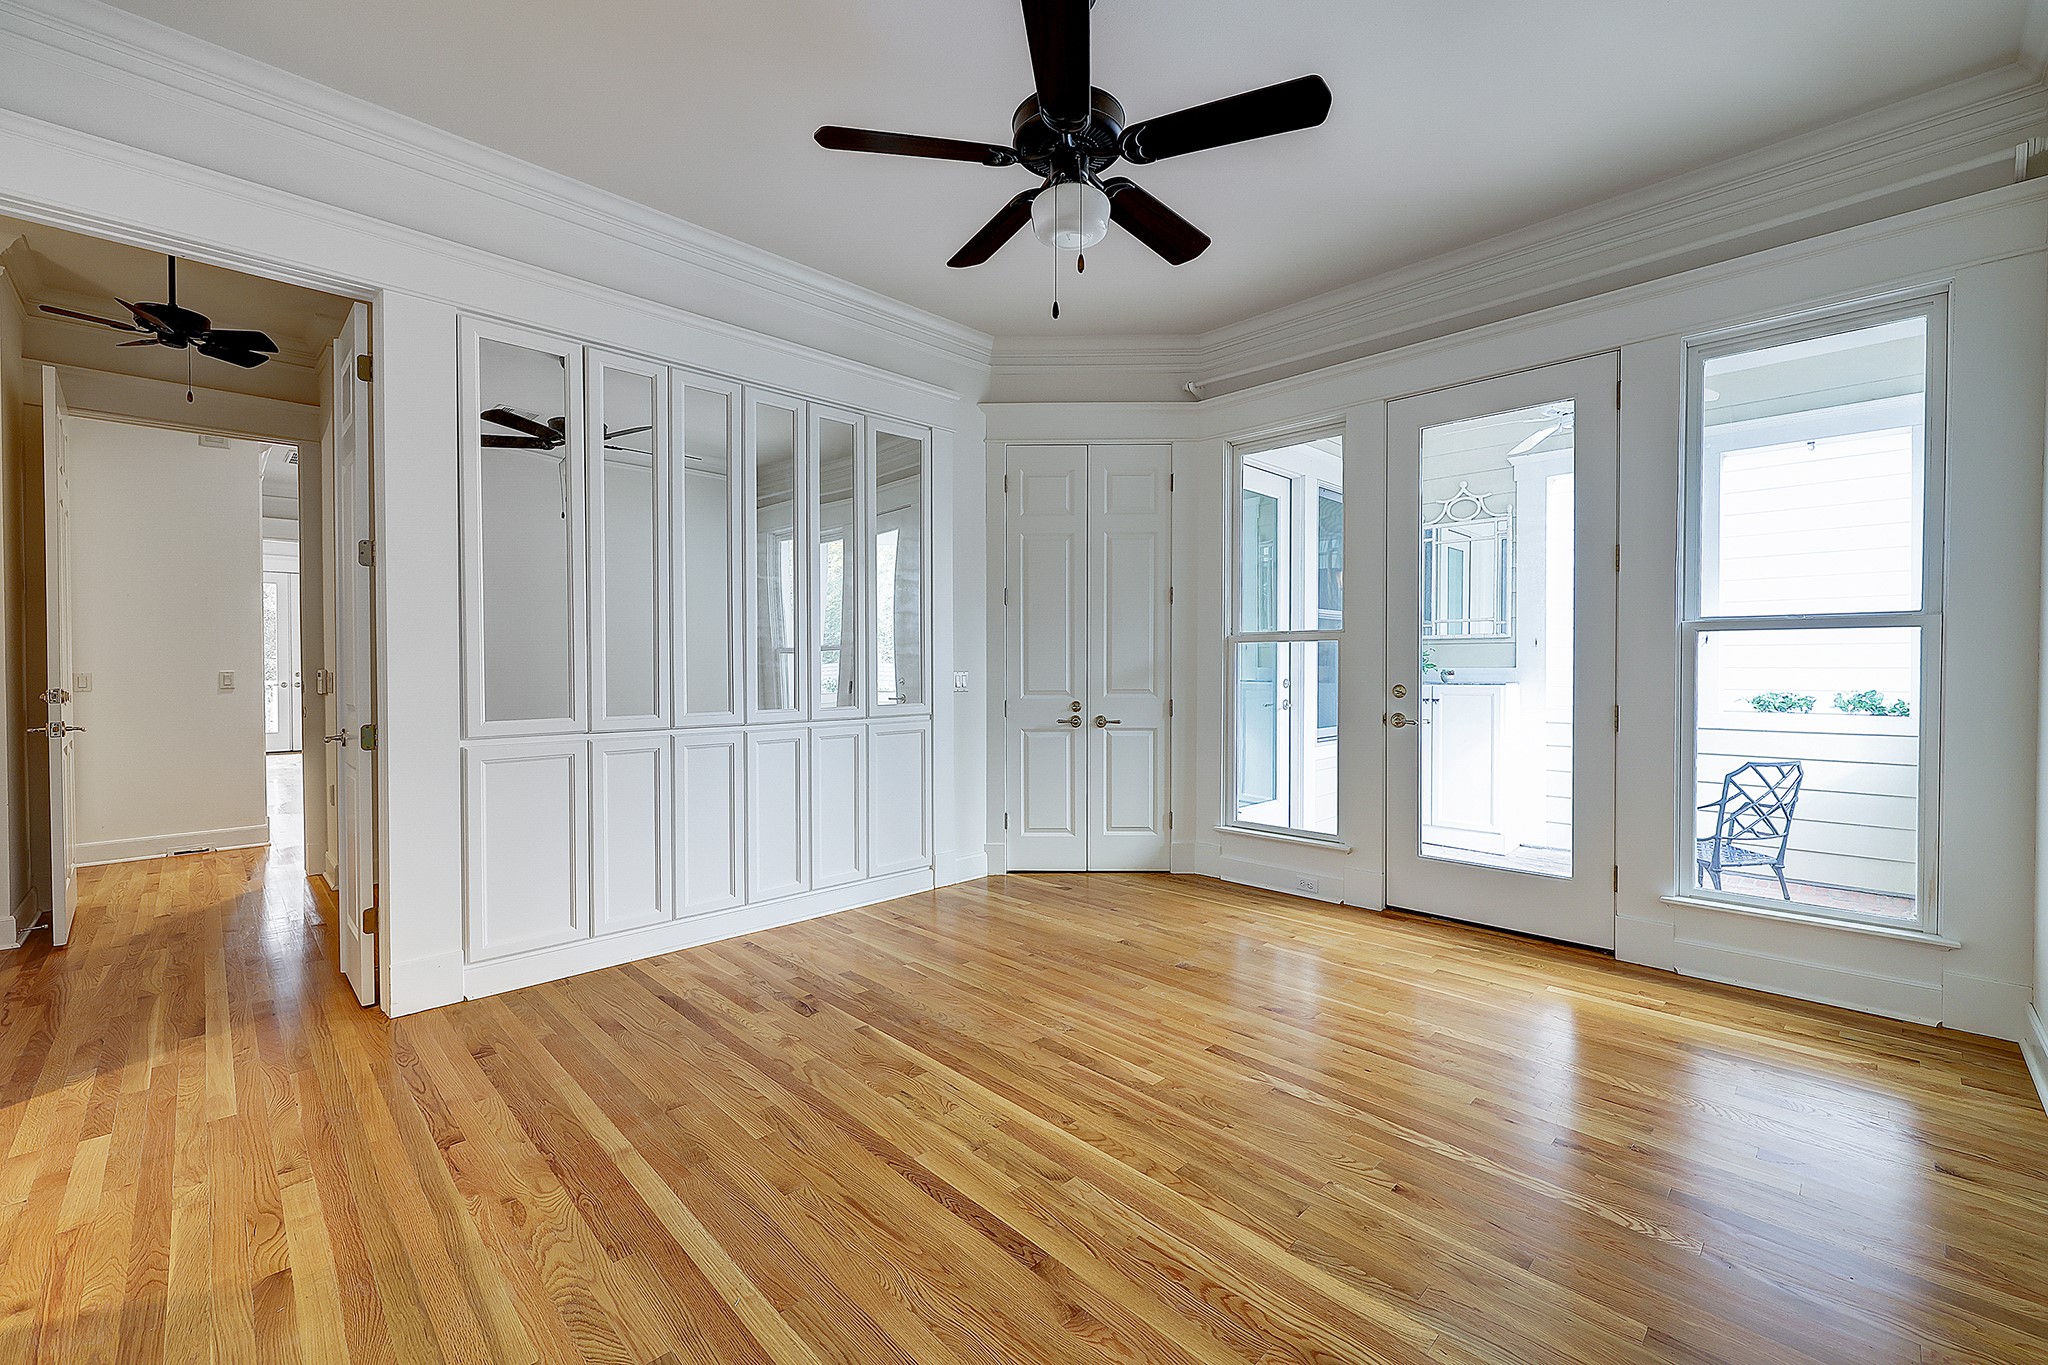 The wood floors continue into the bedrooms, including this spacious primary bedroom. Plenty of room and with so many built-ins, you don't need much furniture.(virtually staged)